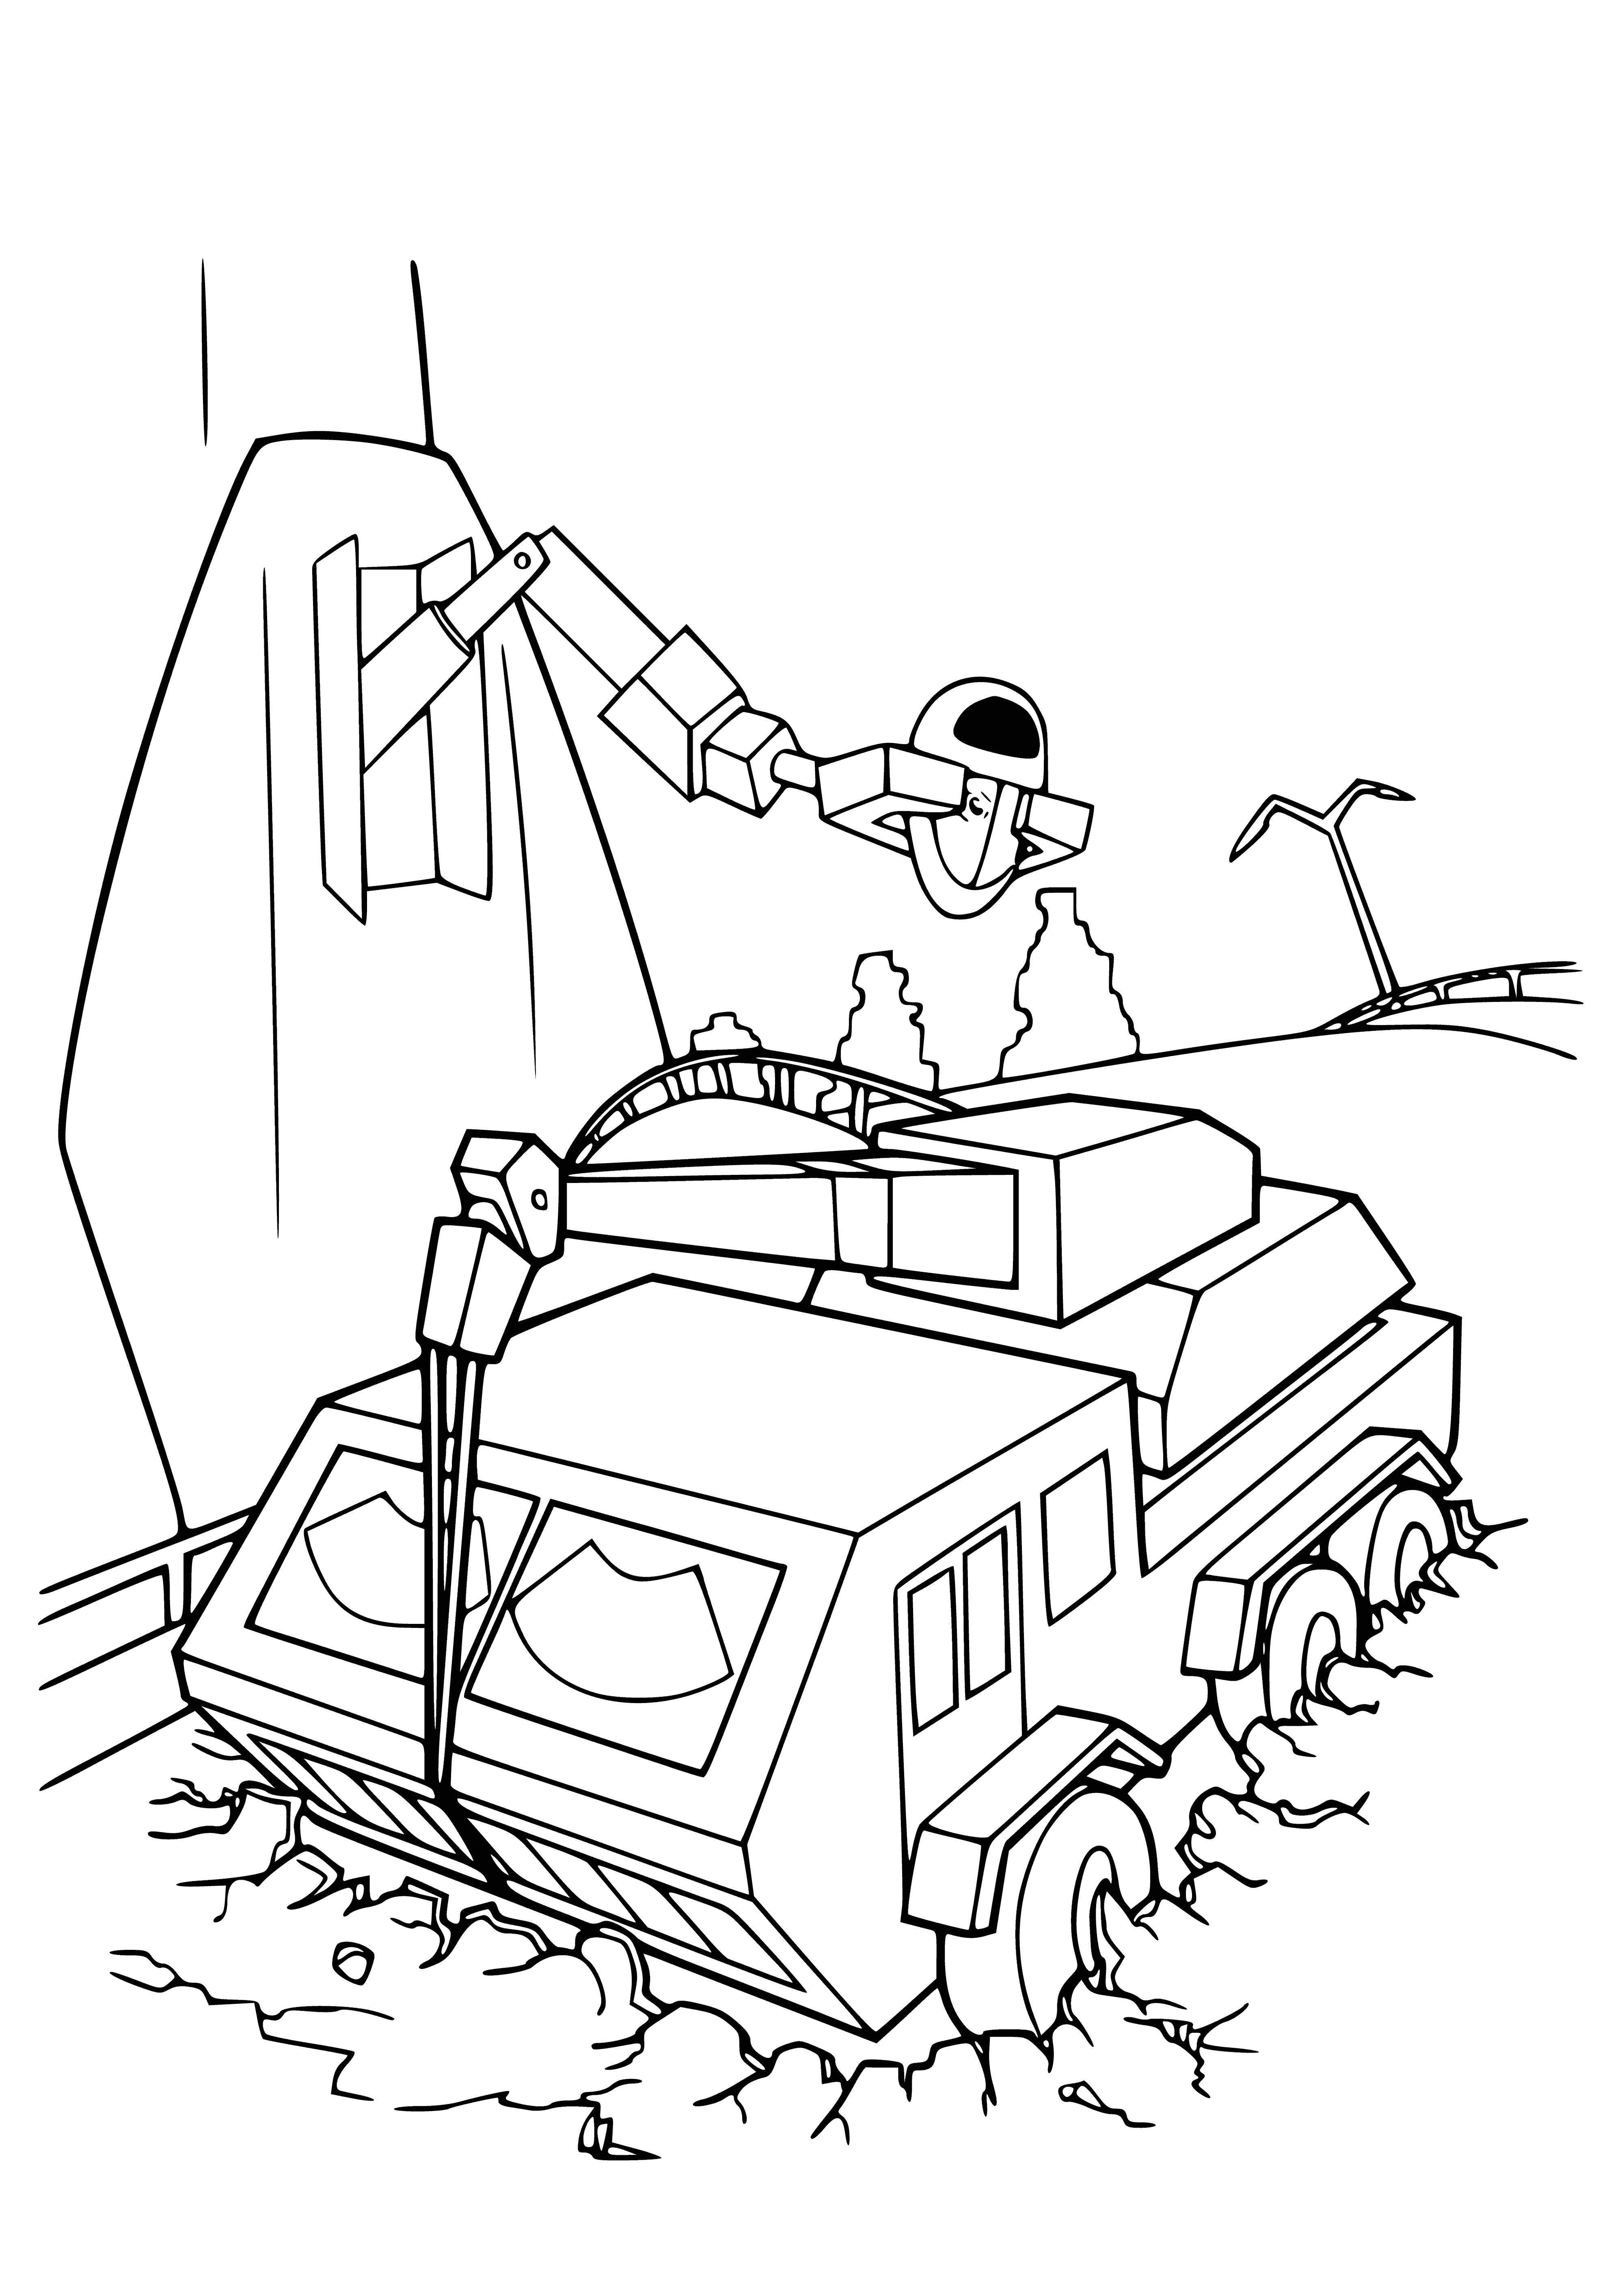 Search robot coloring page